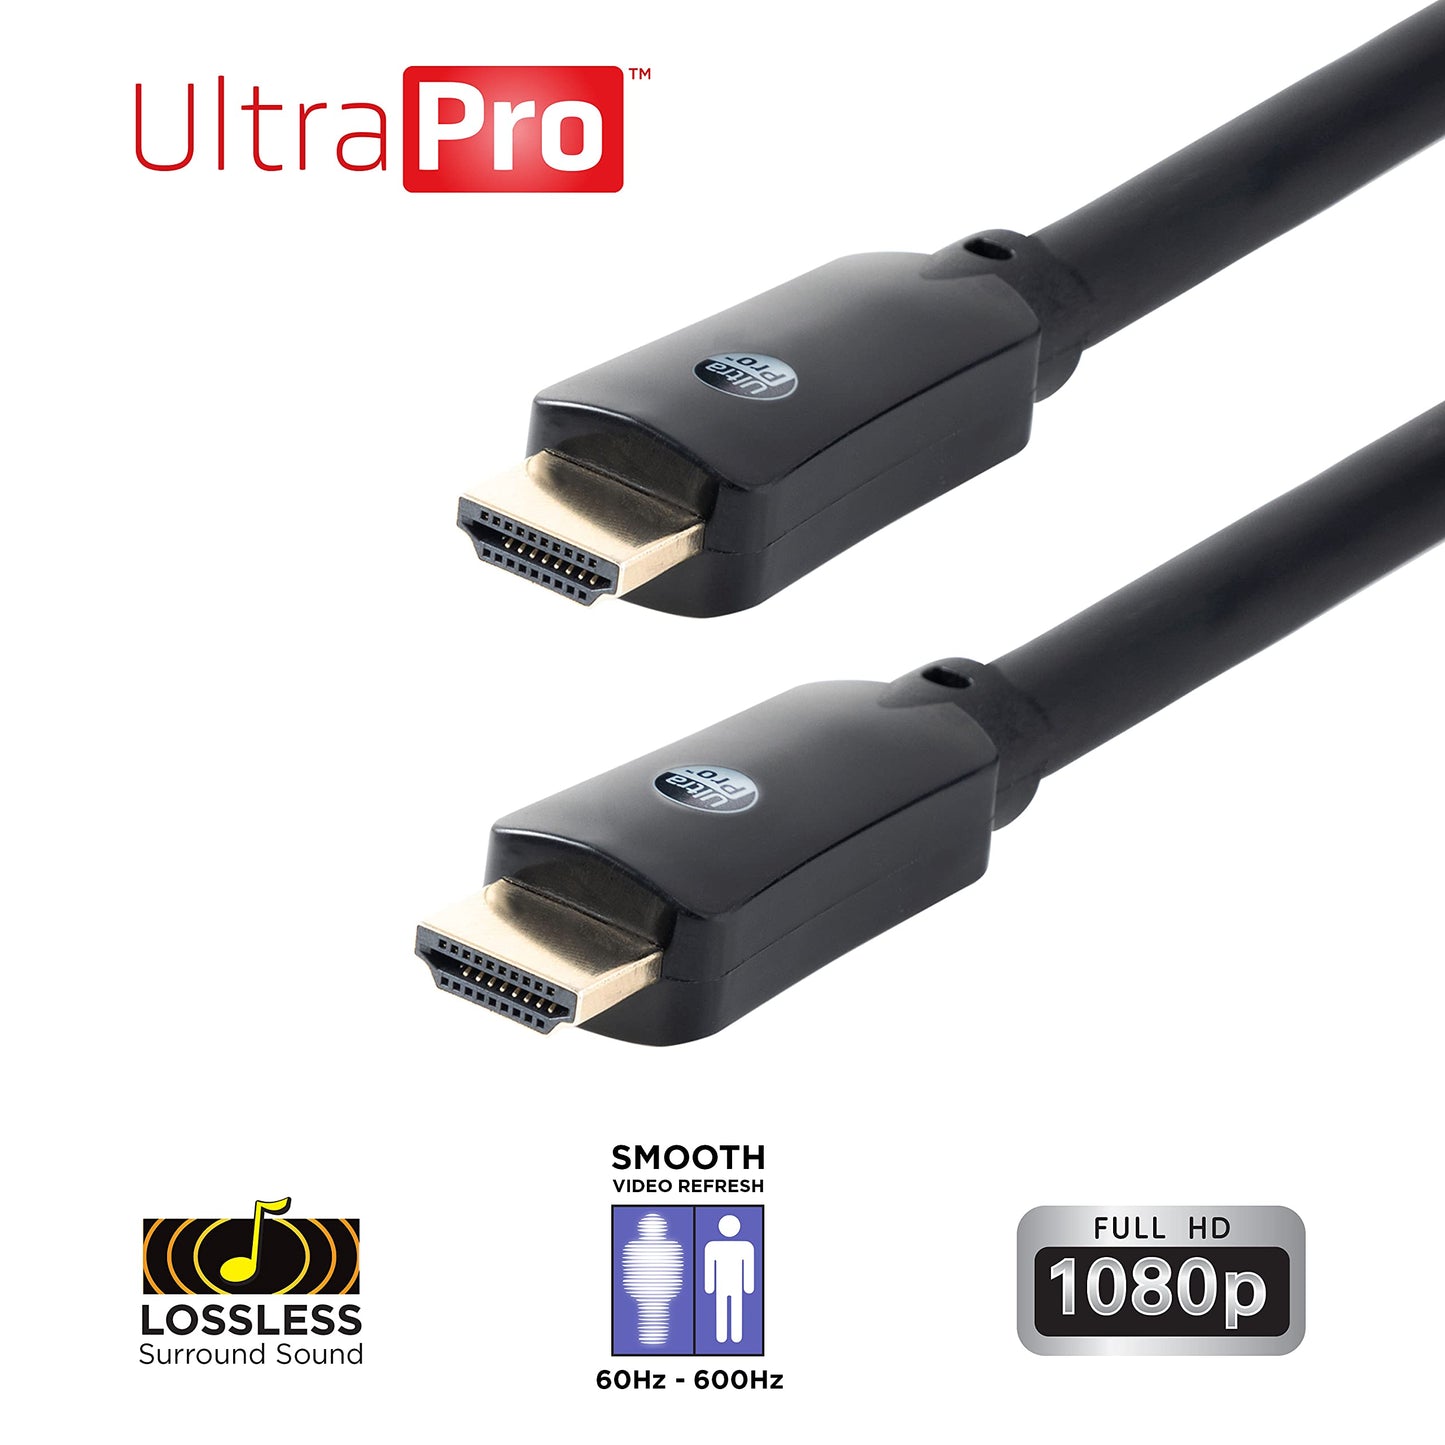 UltraPro in-Wall HDMI Cable, 25 ft. CL3 Rated High Speed, 1080P 10.2Gbps Ethernet, Gold Connectors, for Streaming, Gaming, Home Theater, TV, Satellite, 57132